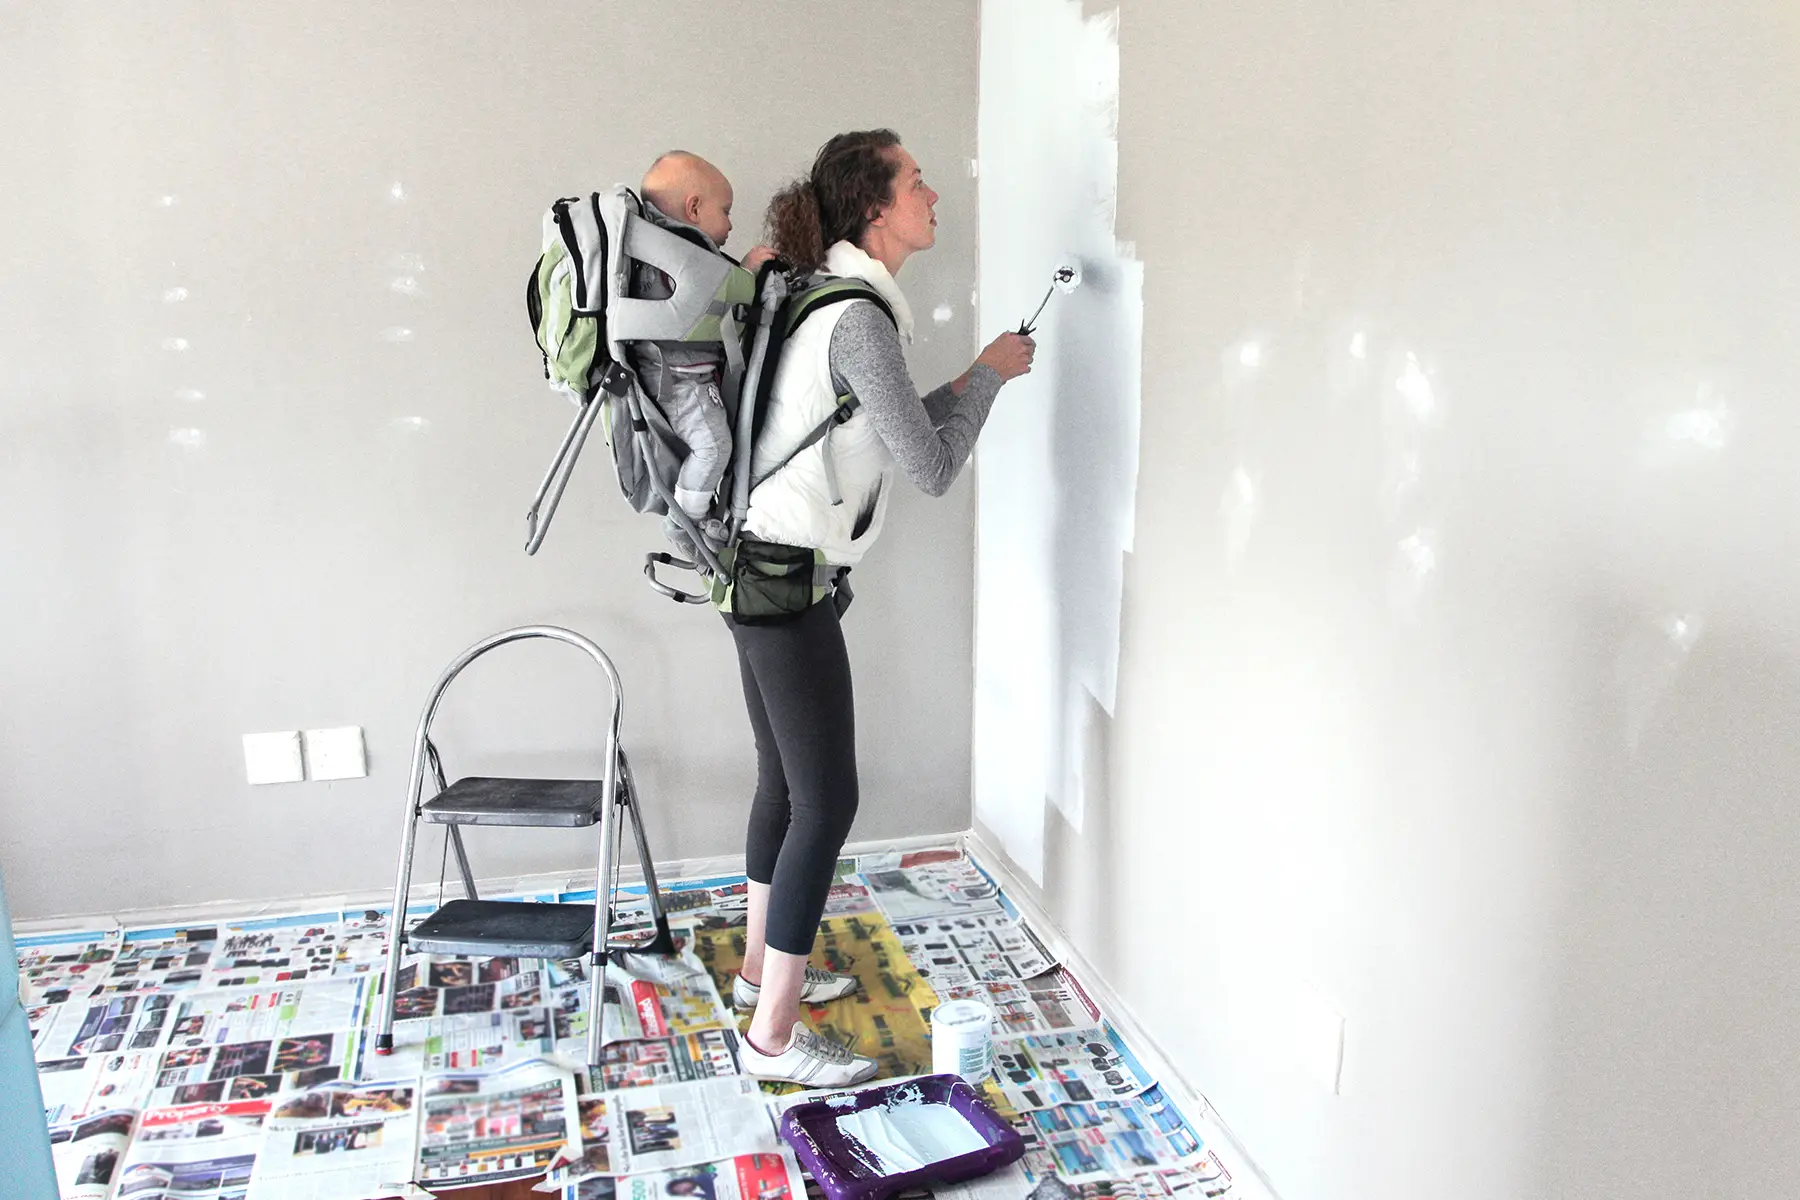 A mum carrying baby on her back paints the wall of a room, home improvements